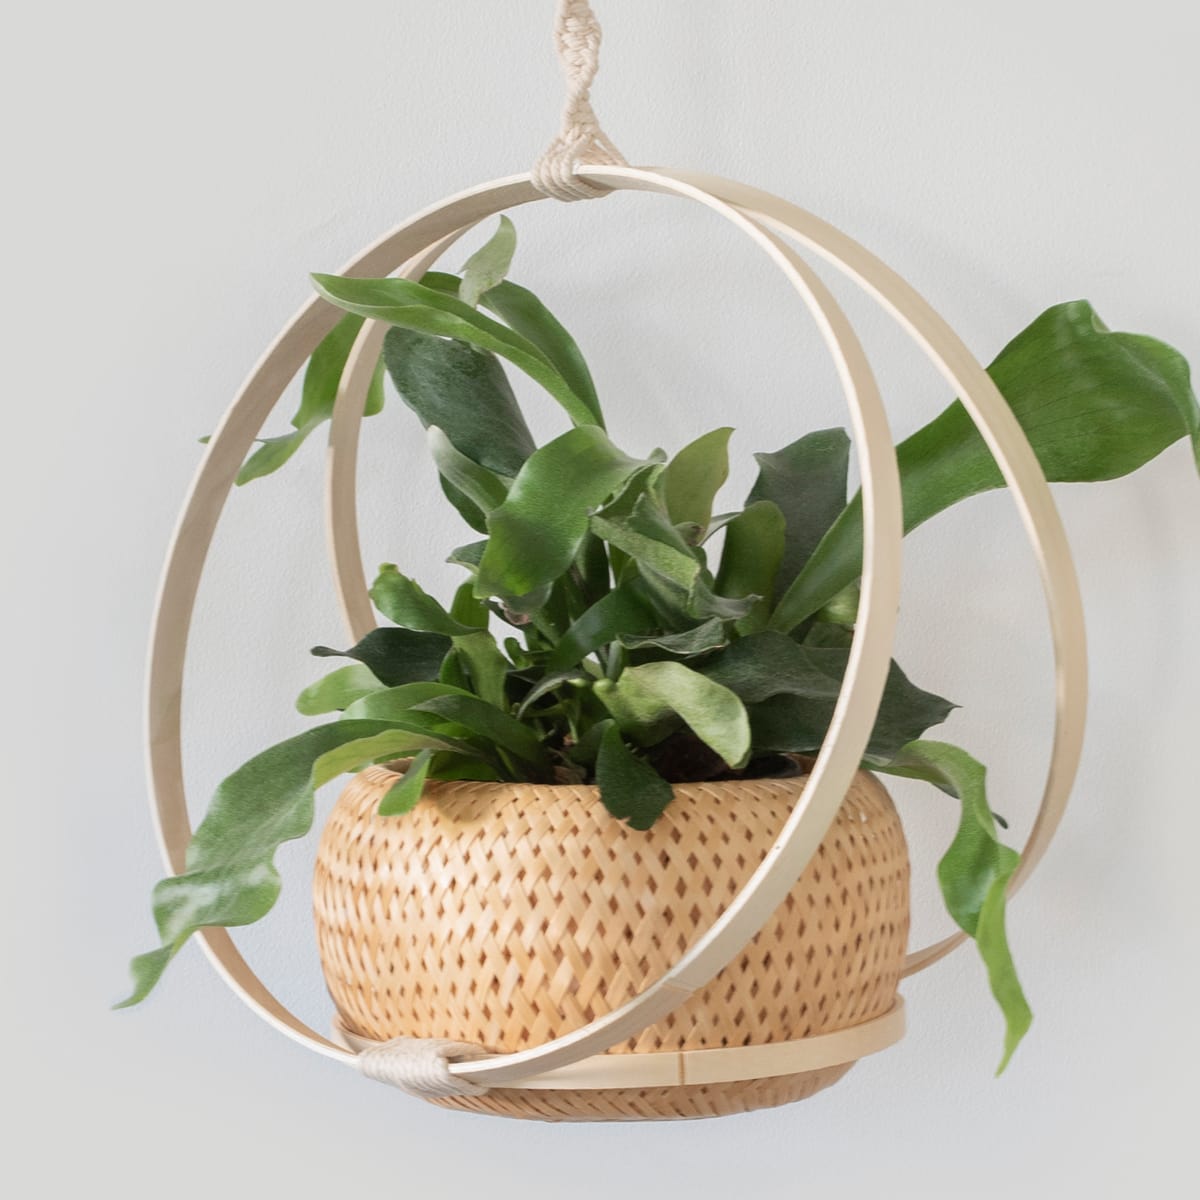 How to make a hanging basket with hoops